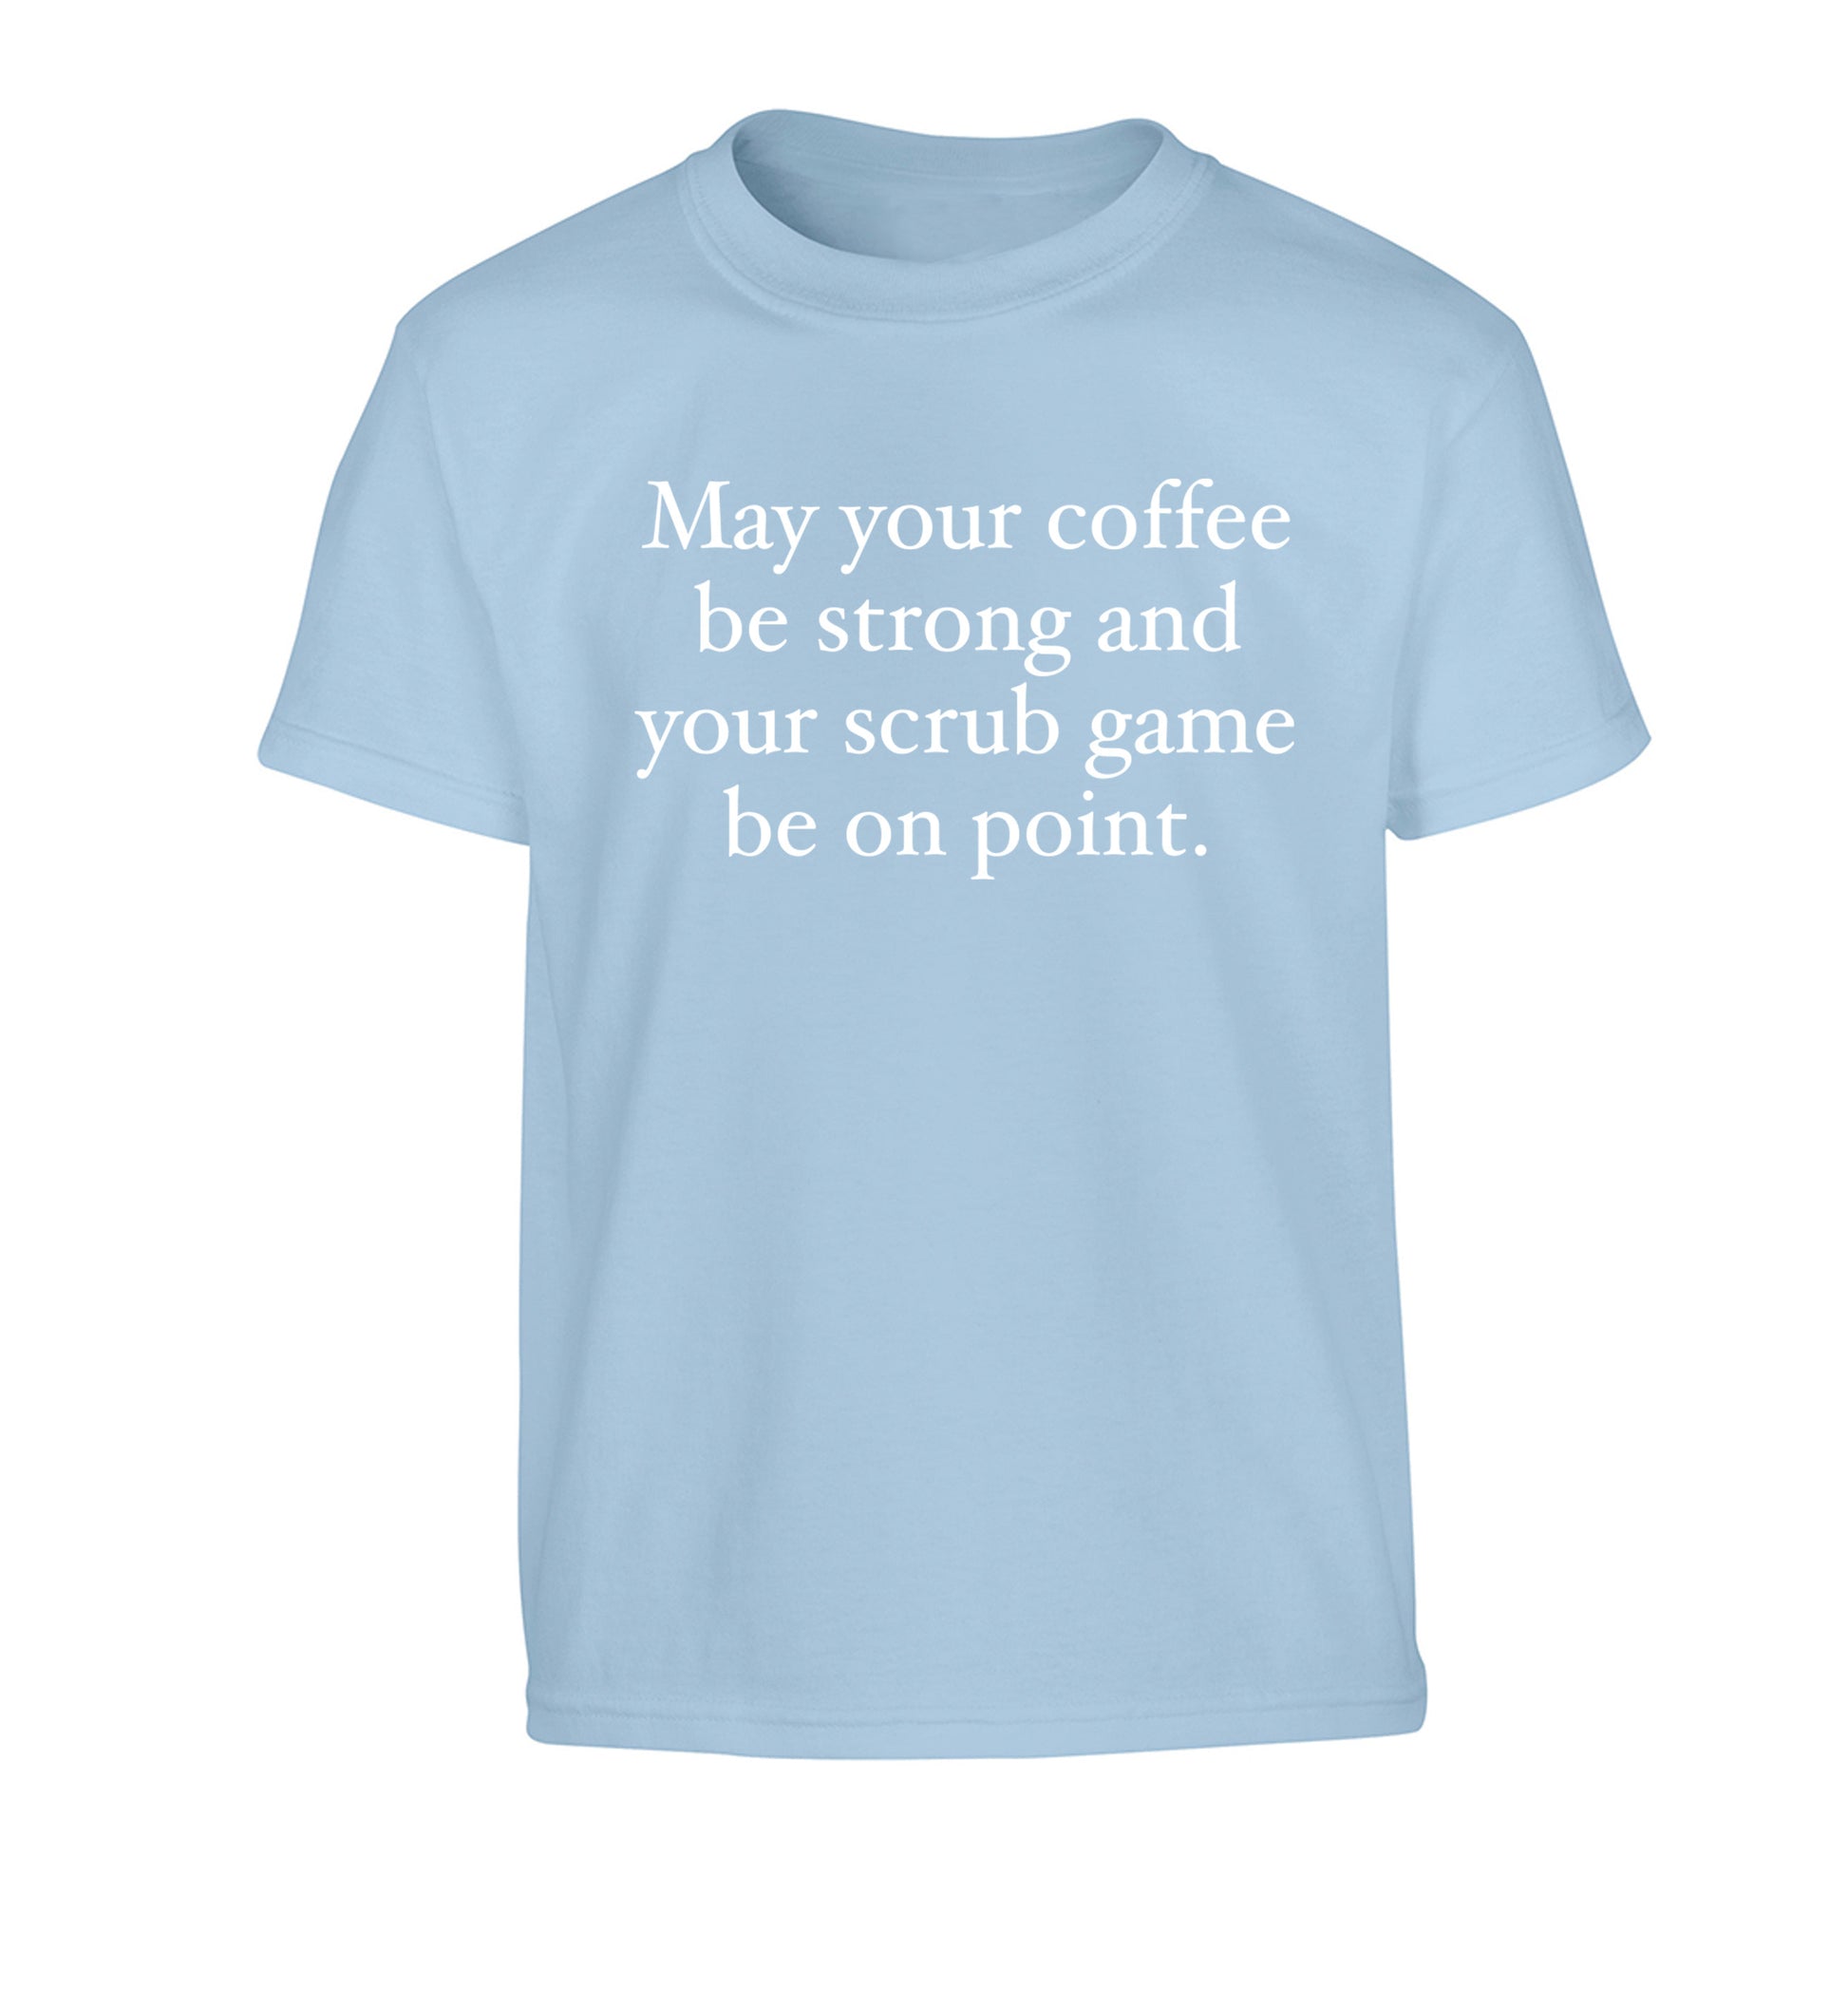 May your caffeine be strong and your scrub game be on point Children's light blue Tshirt 12-14 Years